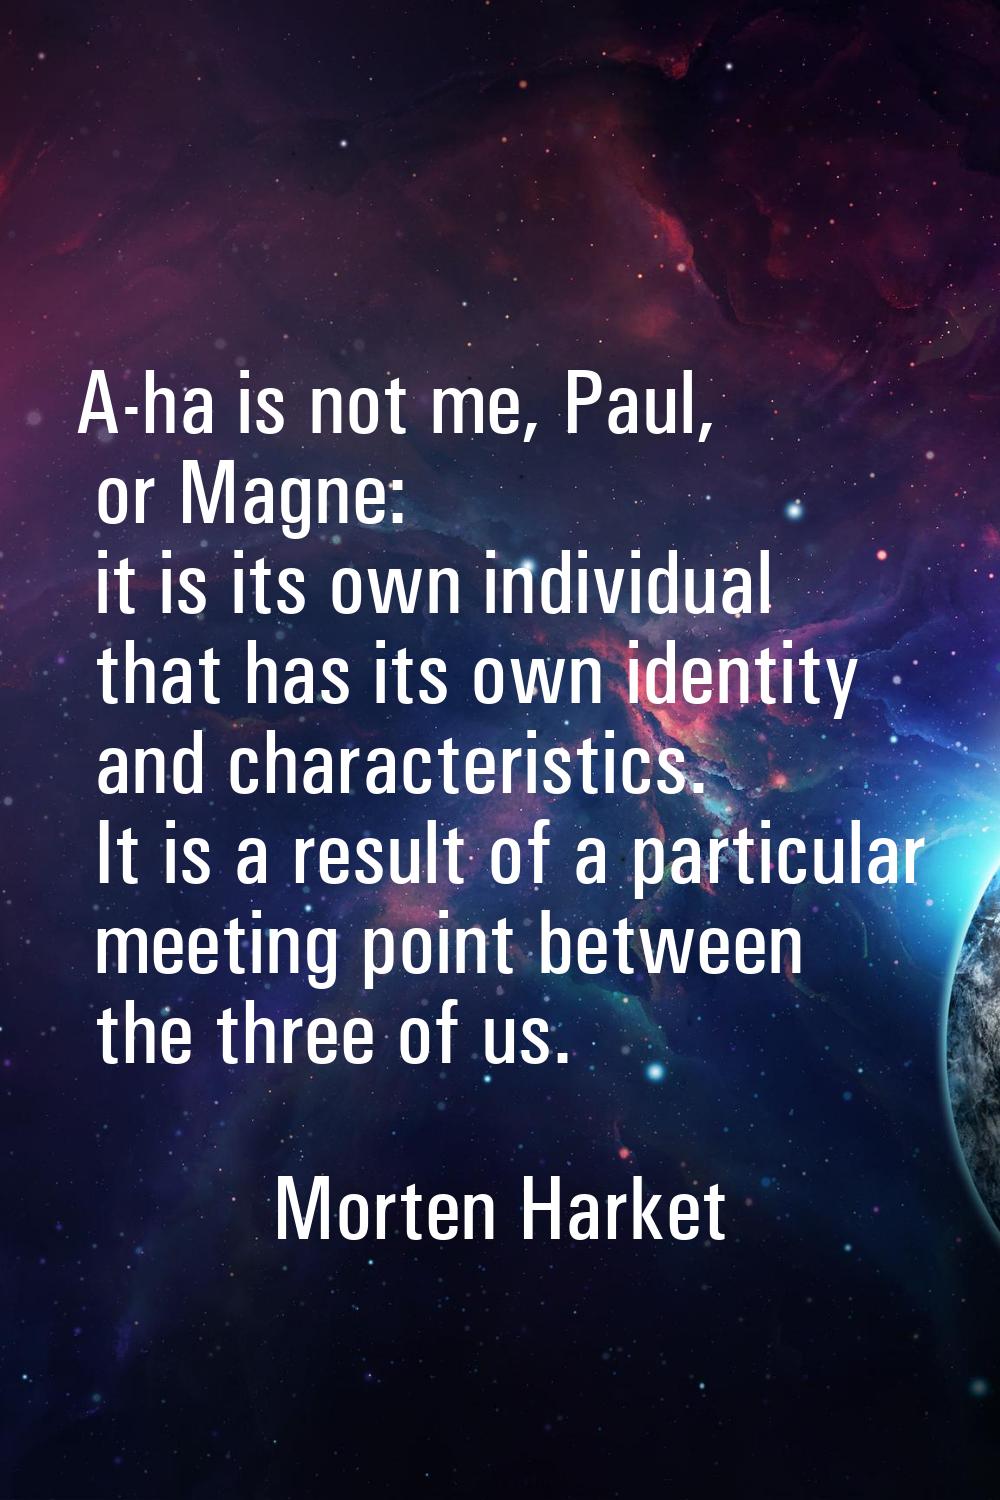 A-ha is not me, Paul, or Magne: it is its own individual that has its own identity and characterist